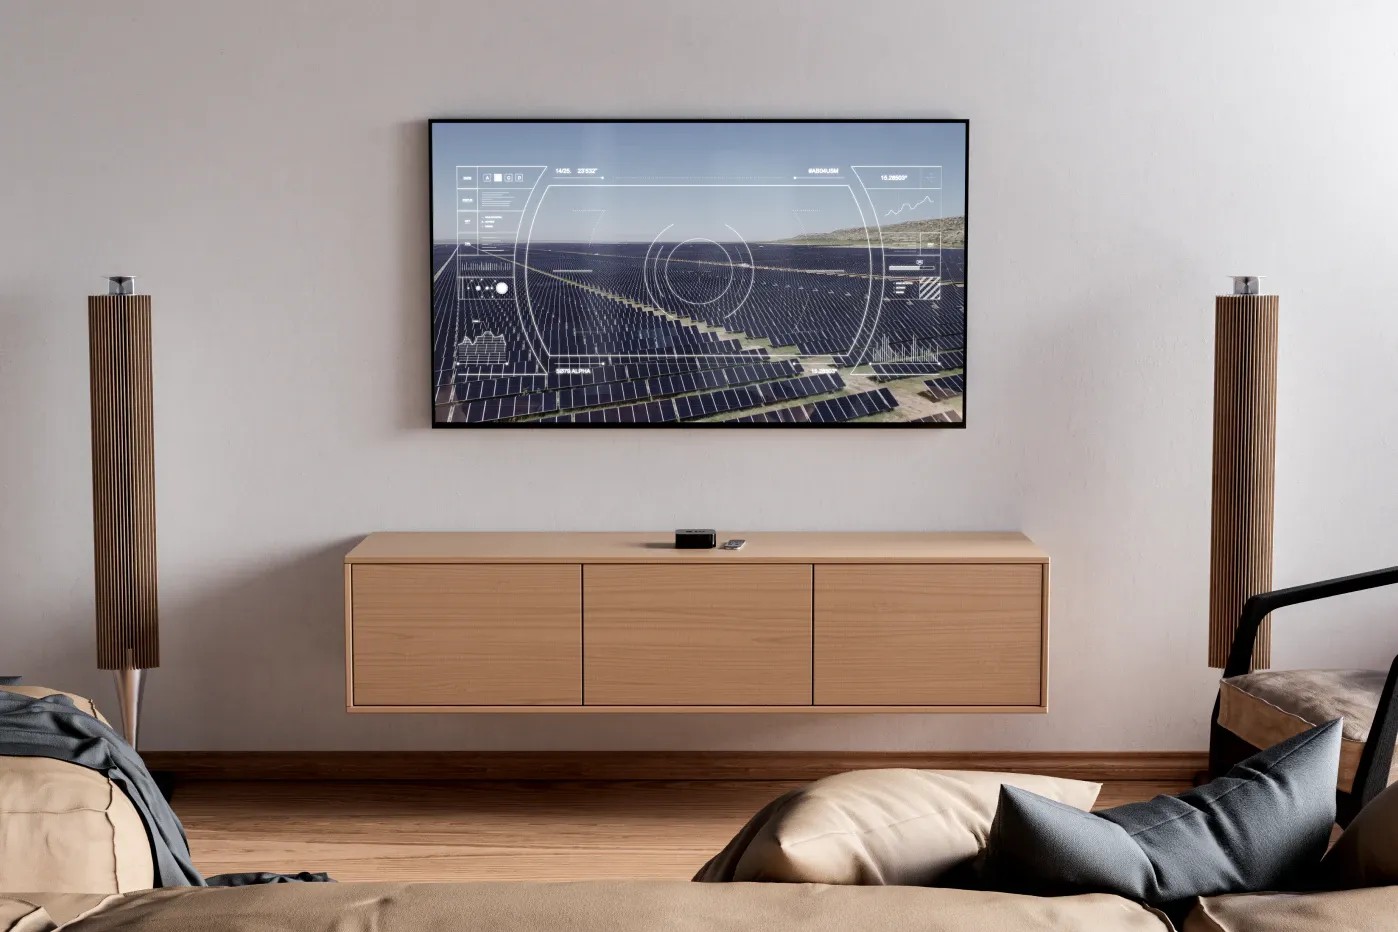 Image of a solar panel field projected on a TV in a livingroom.